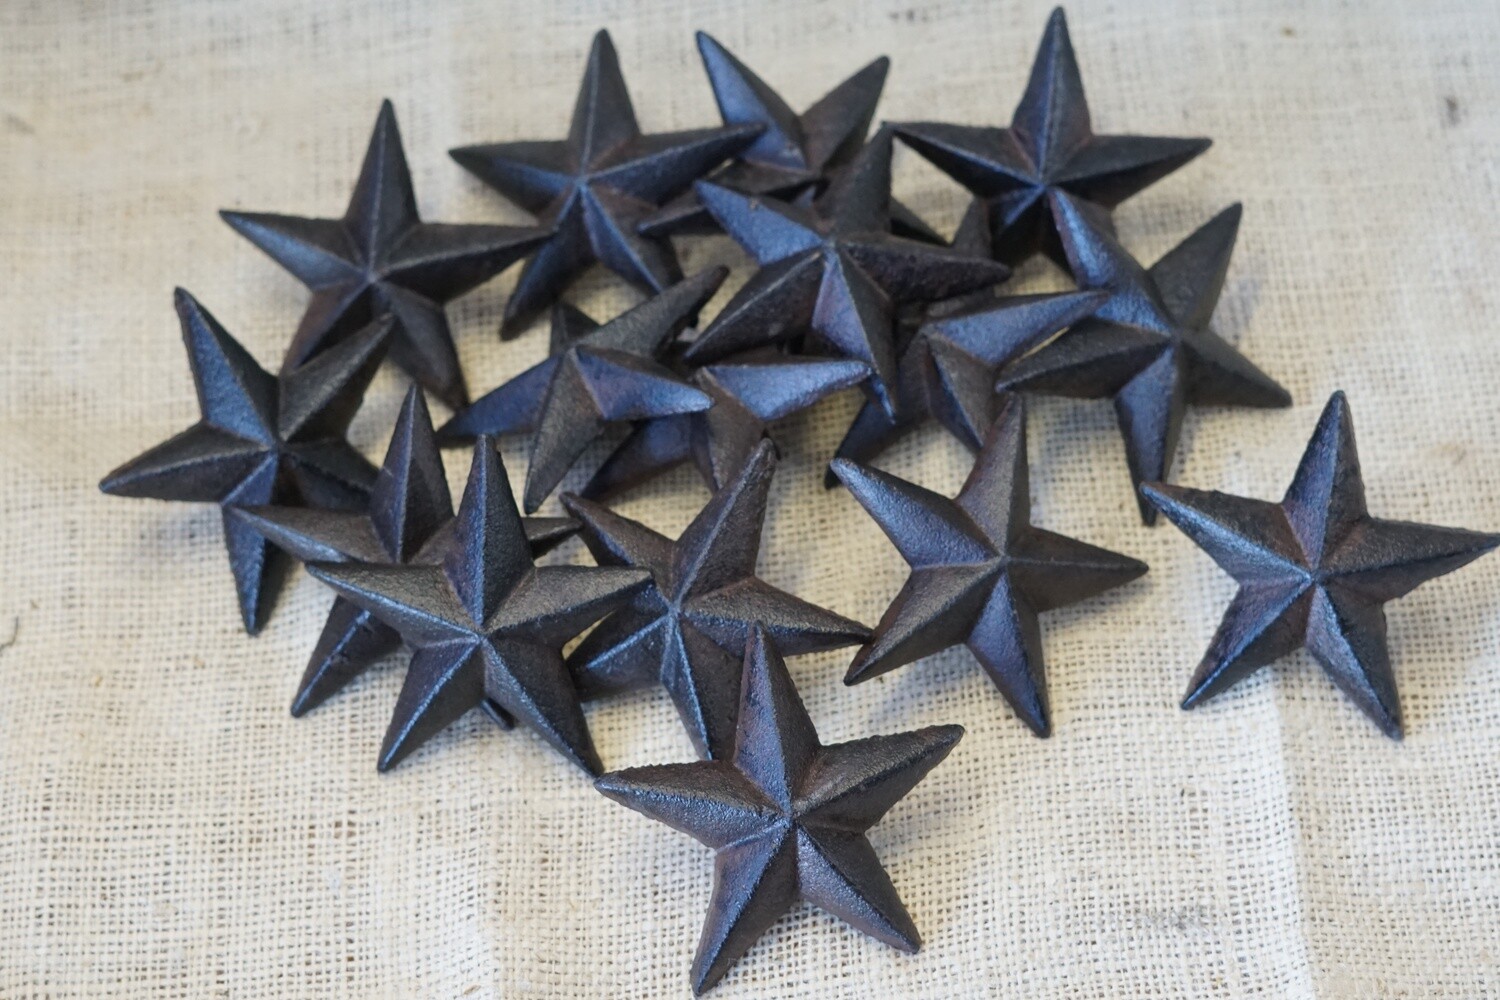 LARGE CAST IRON RUSTIC STAR NAIL, 3 1/2